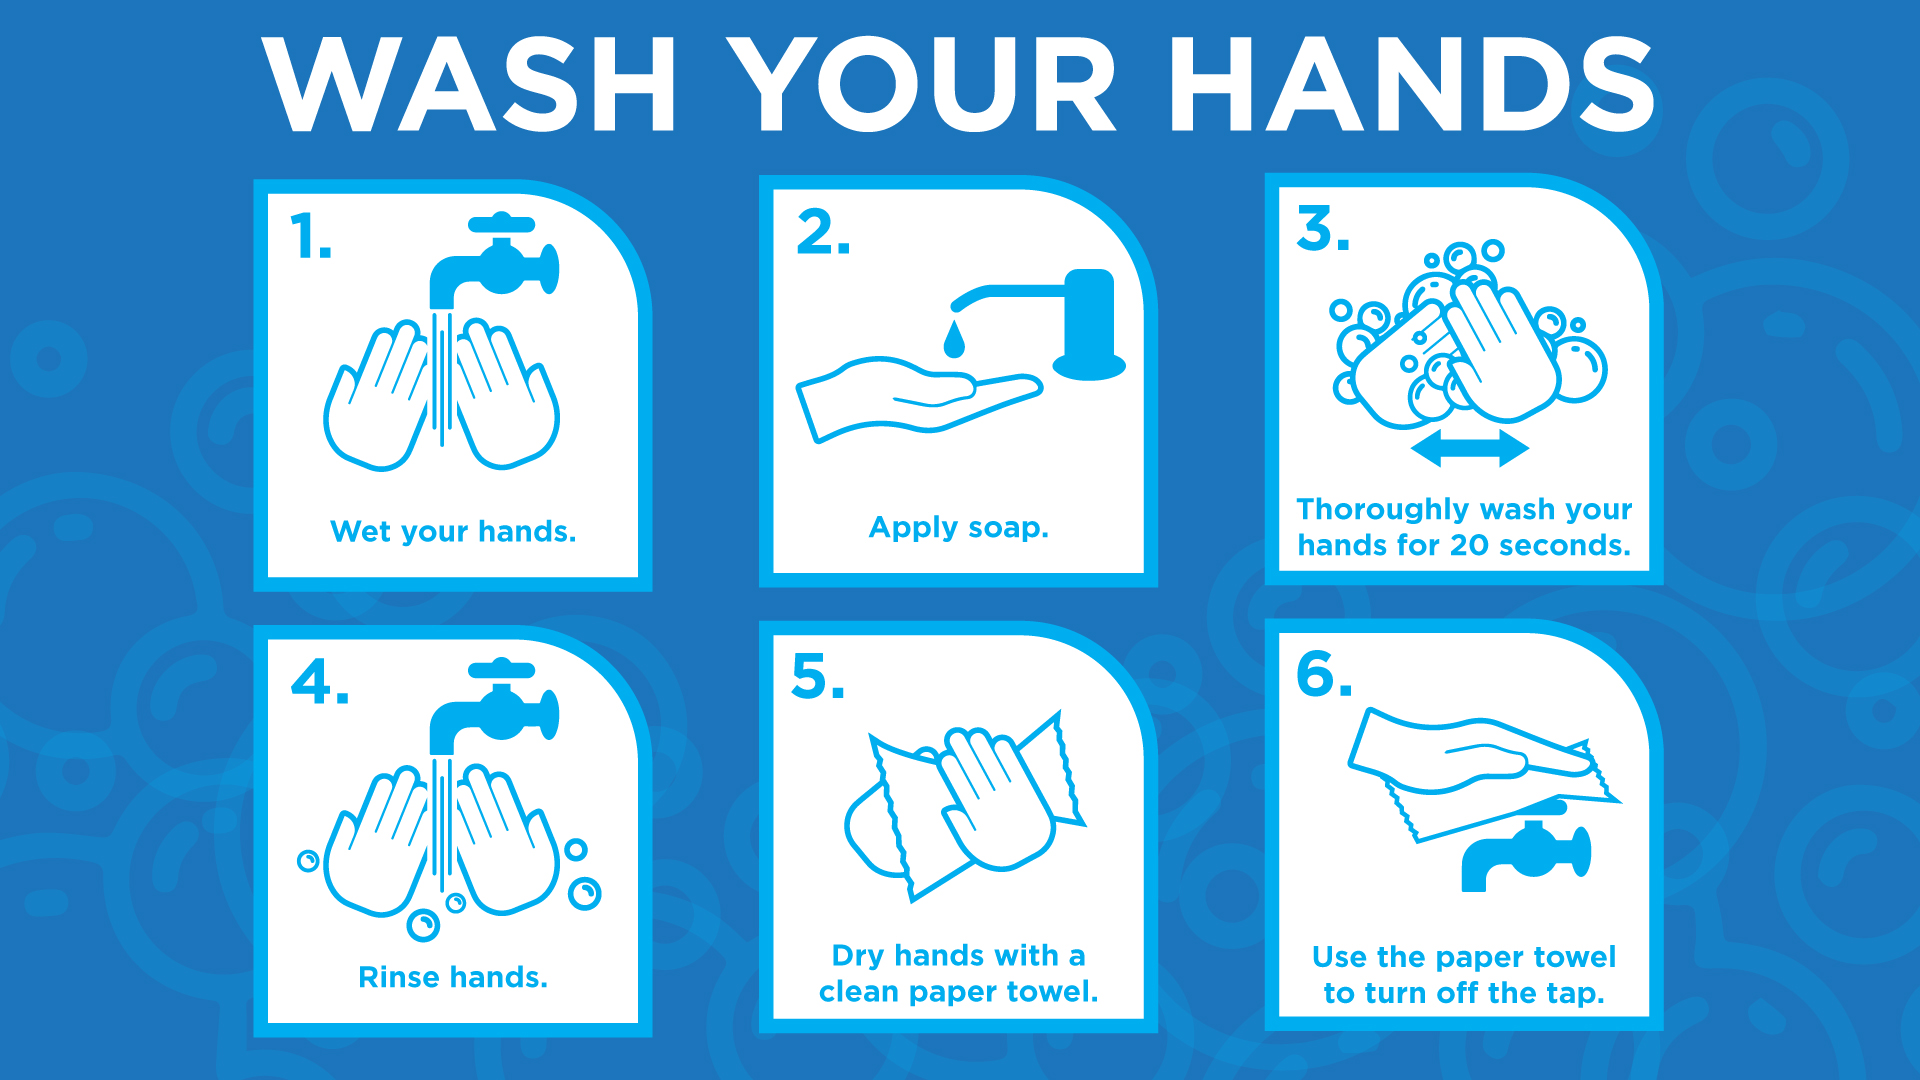 Wash Hands Poster 24”x 12”, printed on White PVC (interior use)